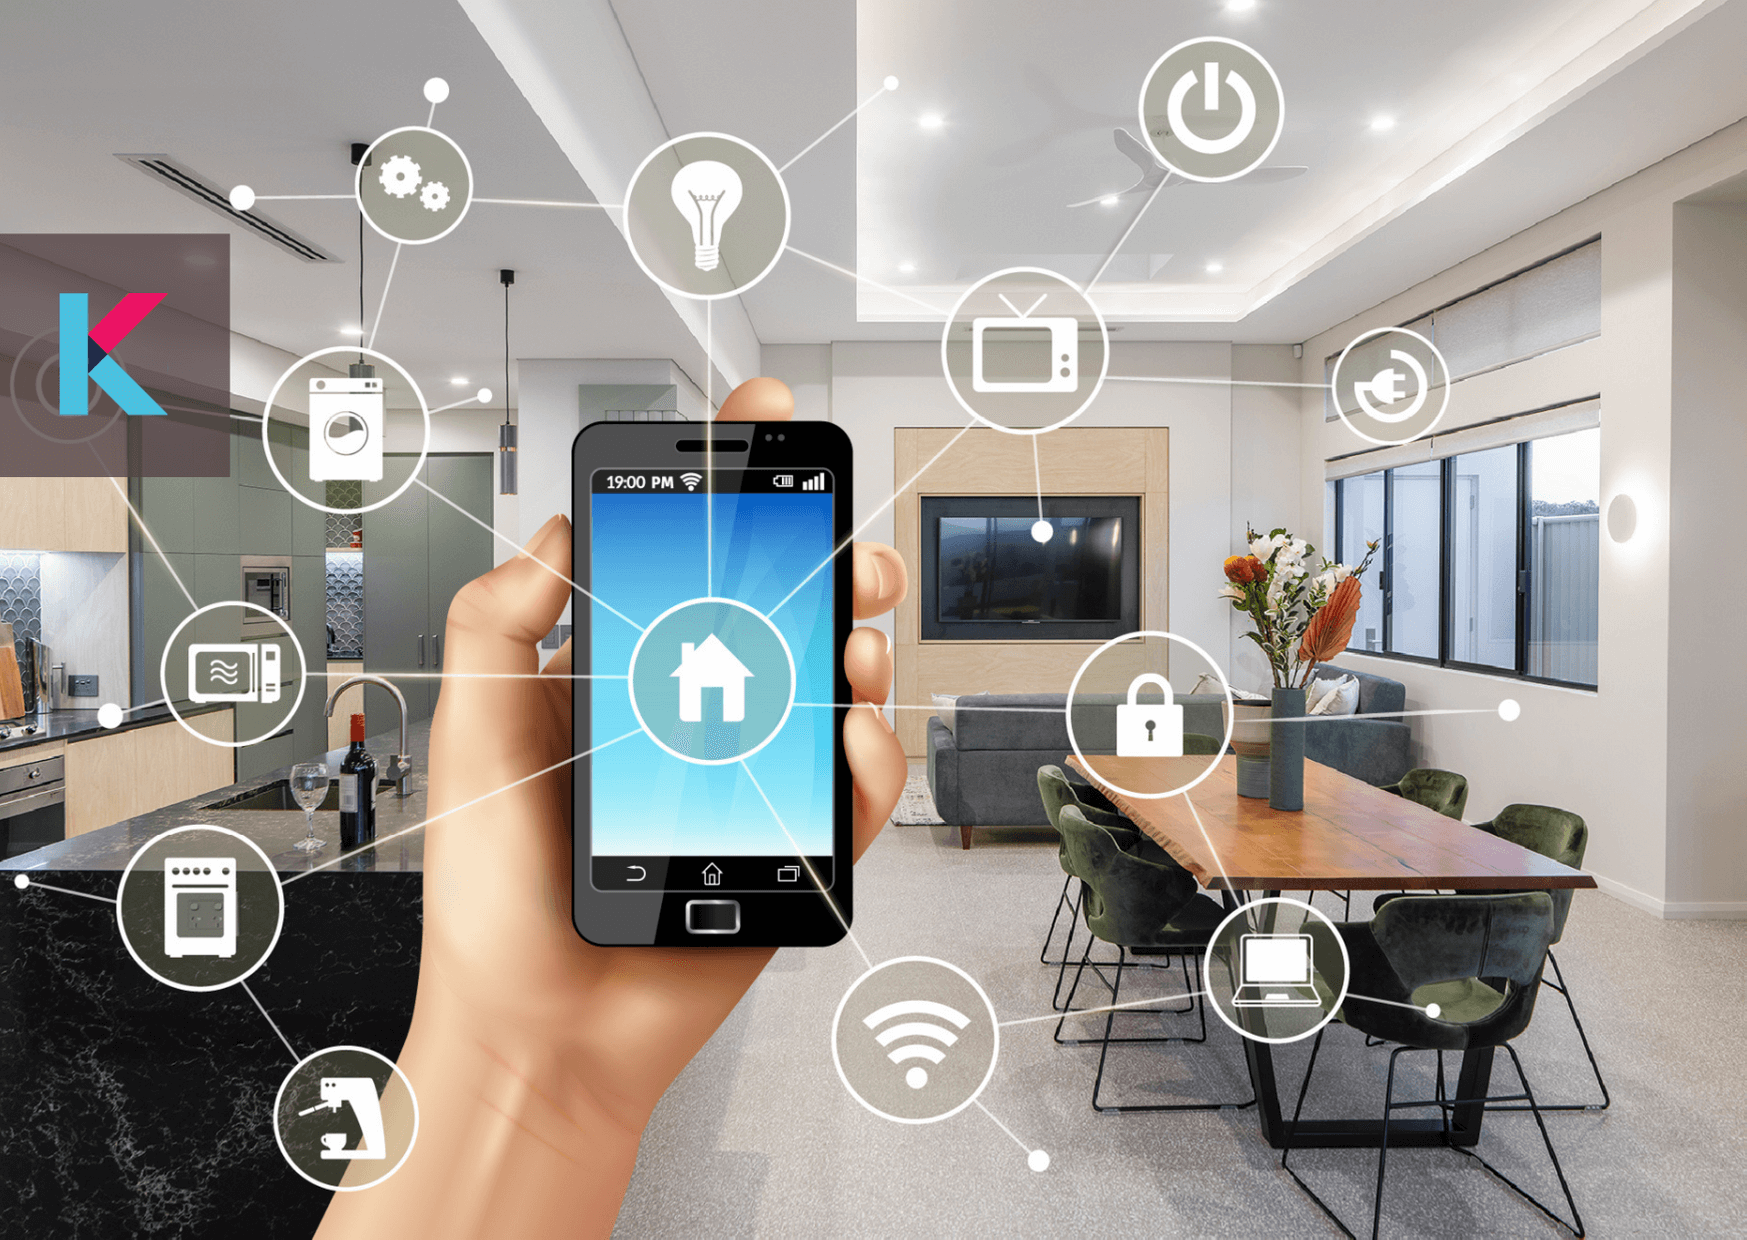 Smart Home Technology generally denotes any set of devices, systems, or appliances connected into remotely controlled network